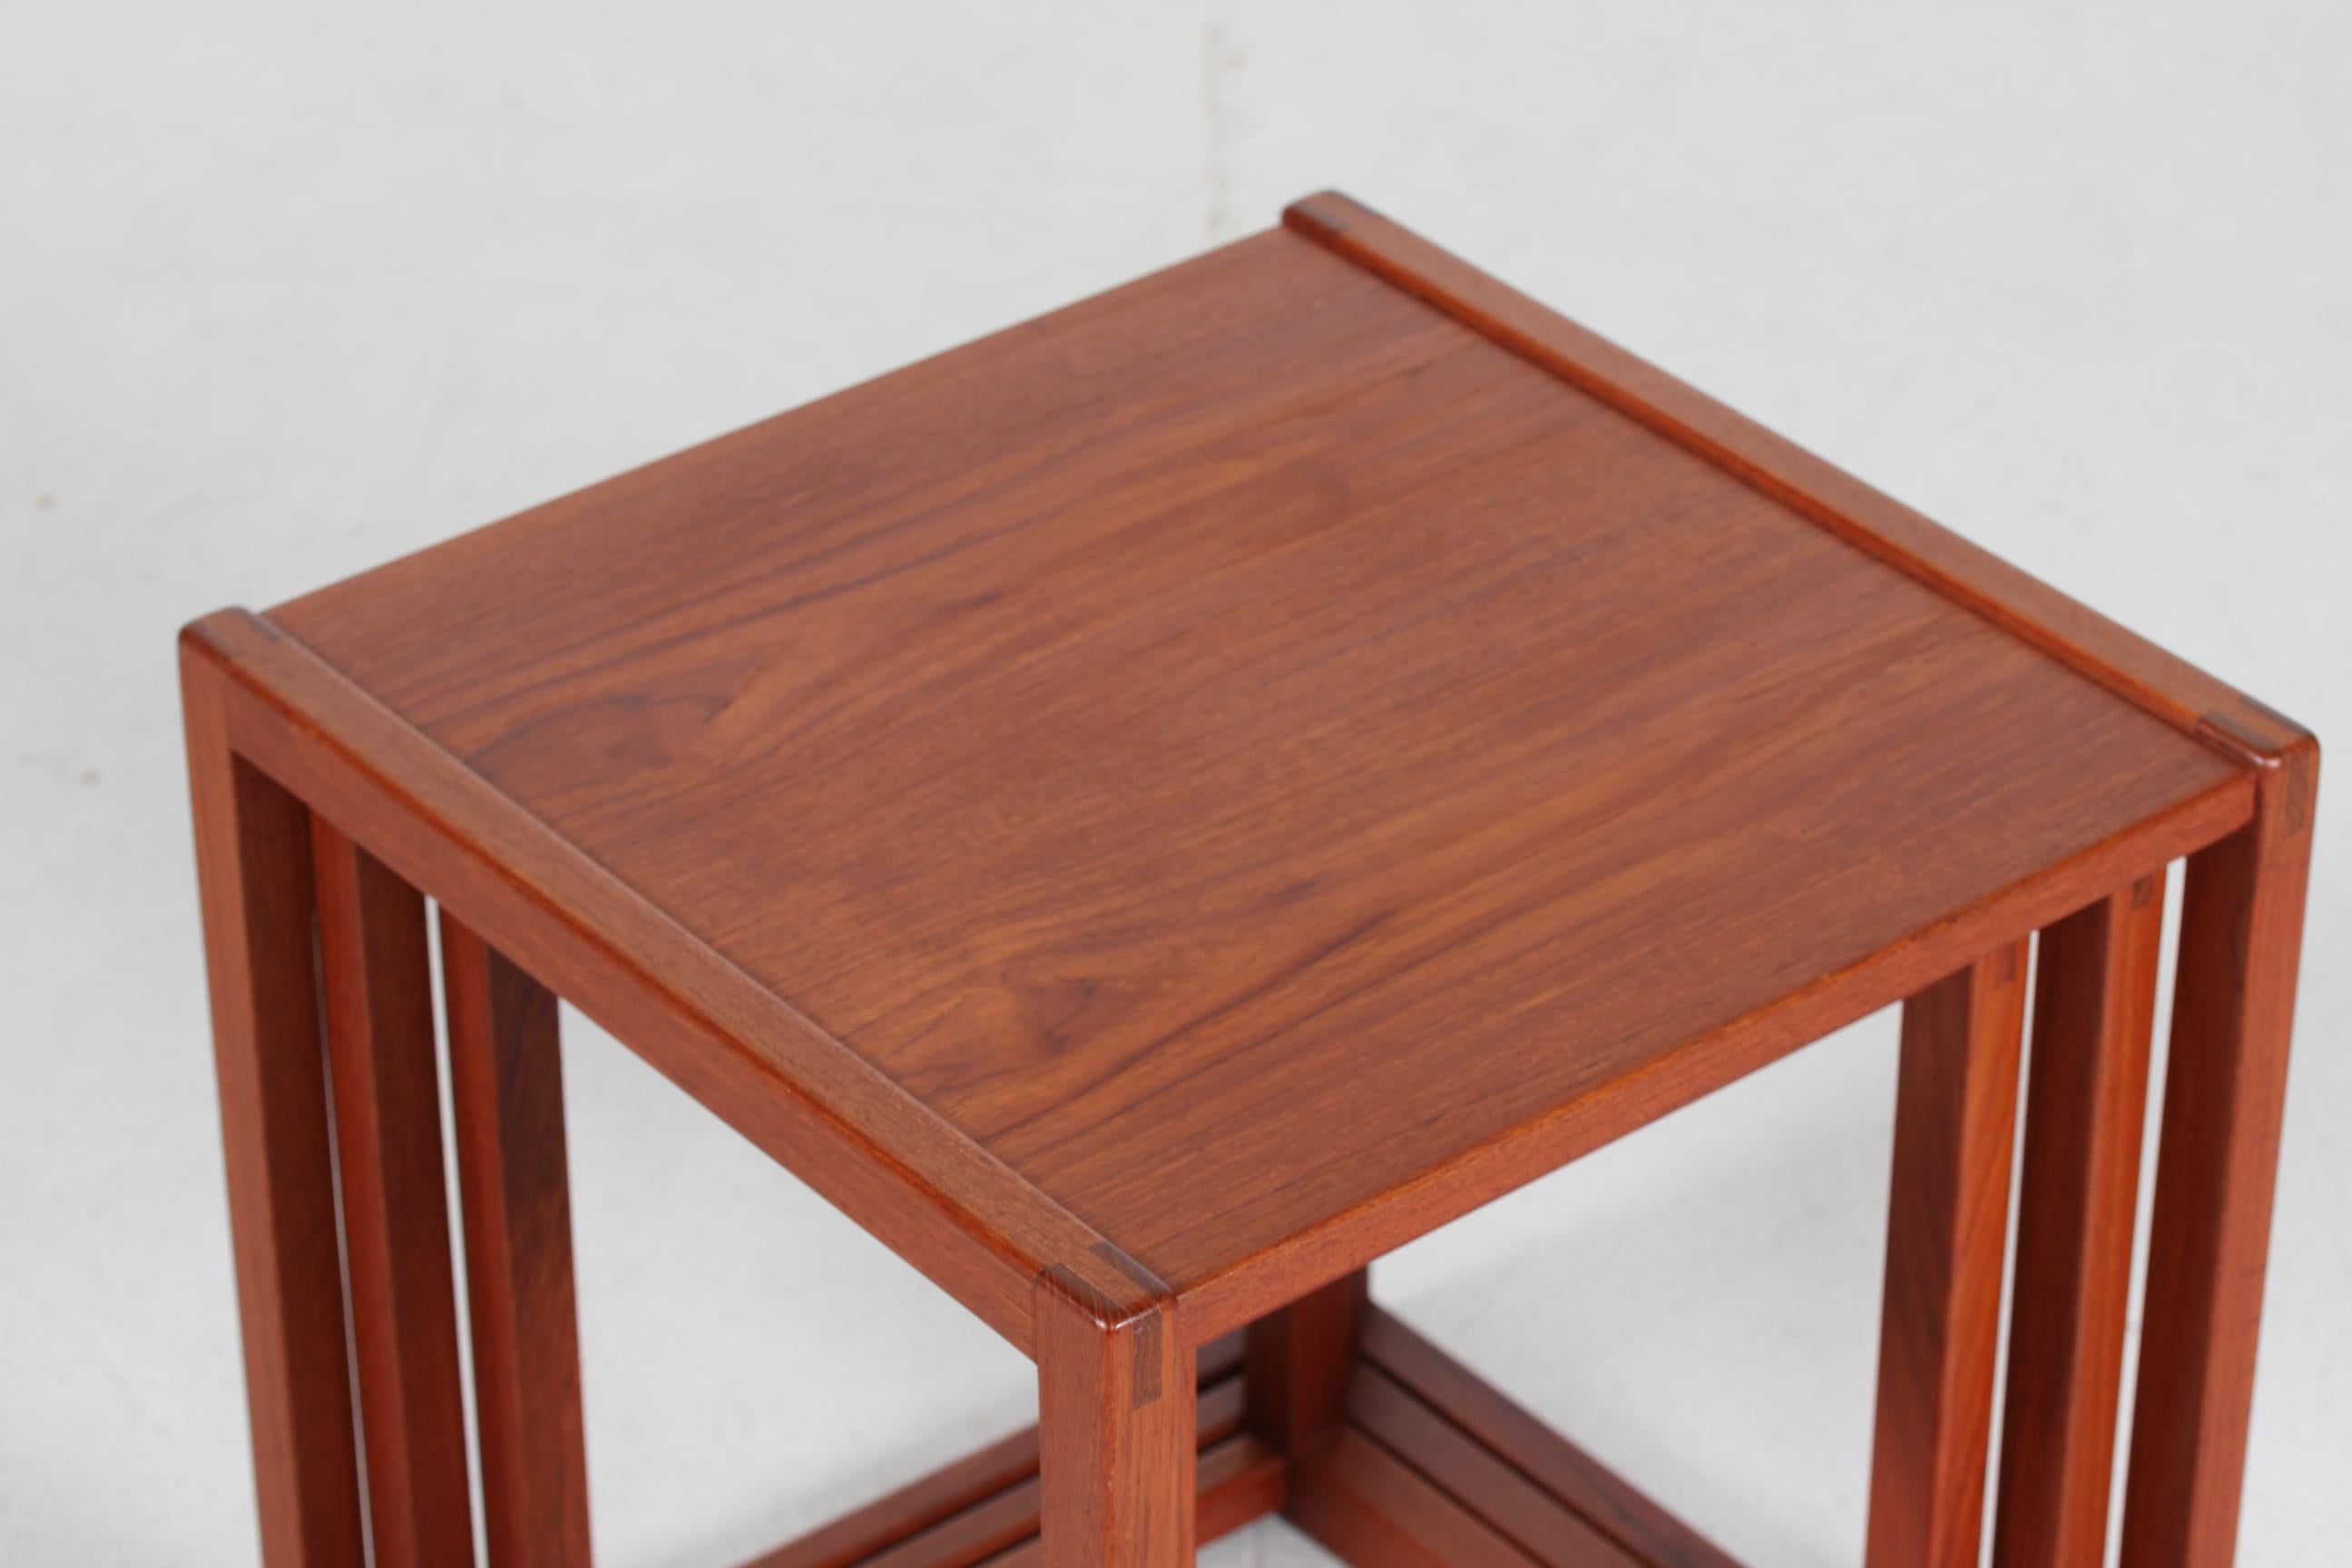 Danish vintage Børge Mogensen cubic nesting tables model 375.
The three tables are made of solid teak with visible joints and are separated by lifting them apart.

The nesting tables are made by Fredericia Stolefabrik and remains in a very good